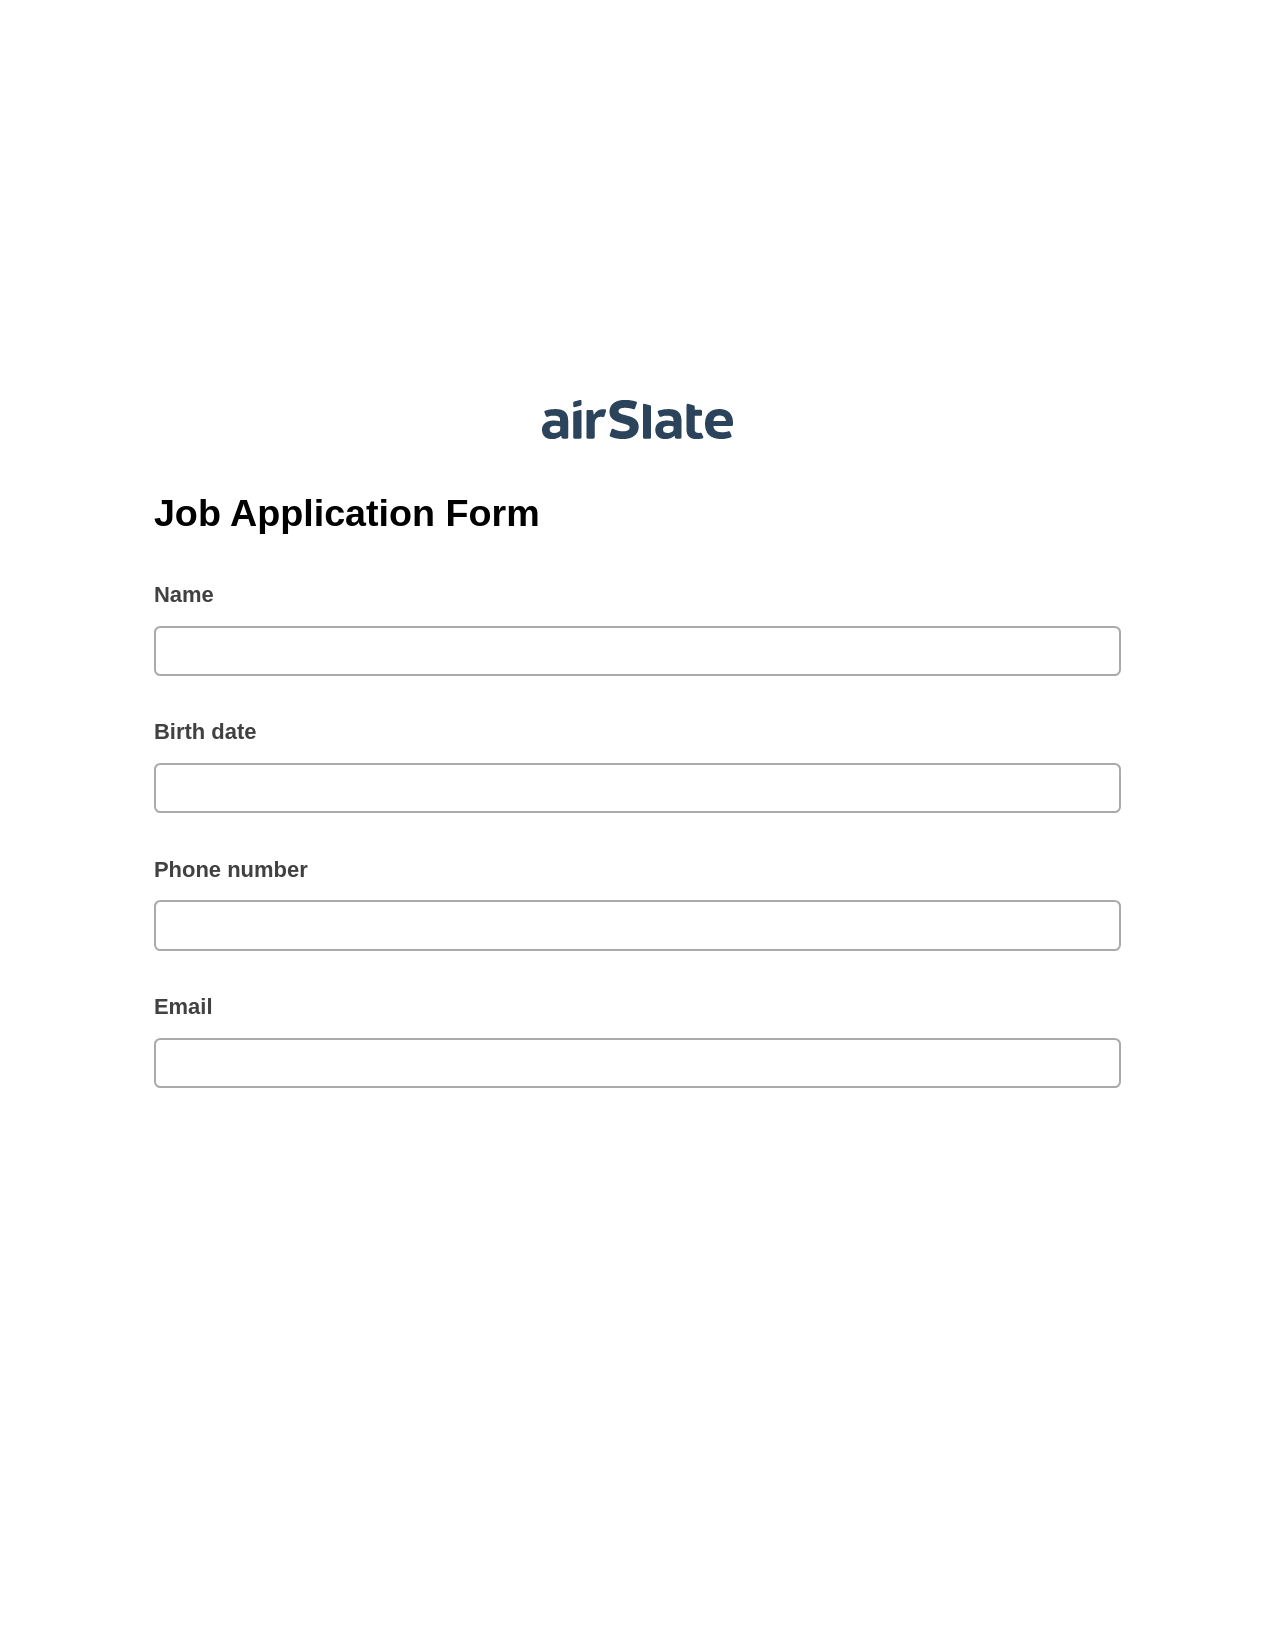 Job Application Form Pre-fill from Excel Spreadsheet Bot, Mailchimp send Campaign bot, Dropbox Bot